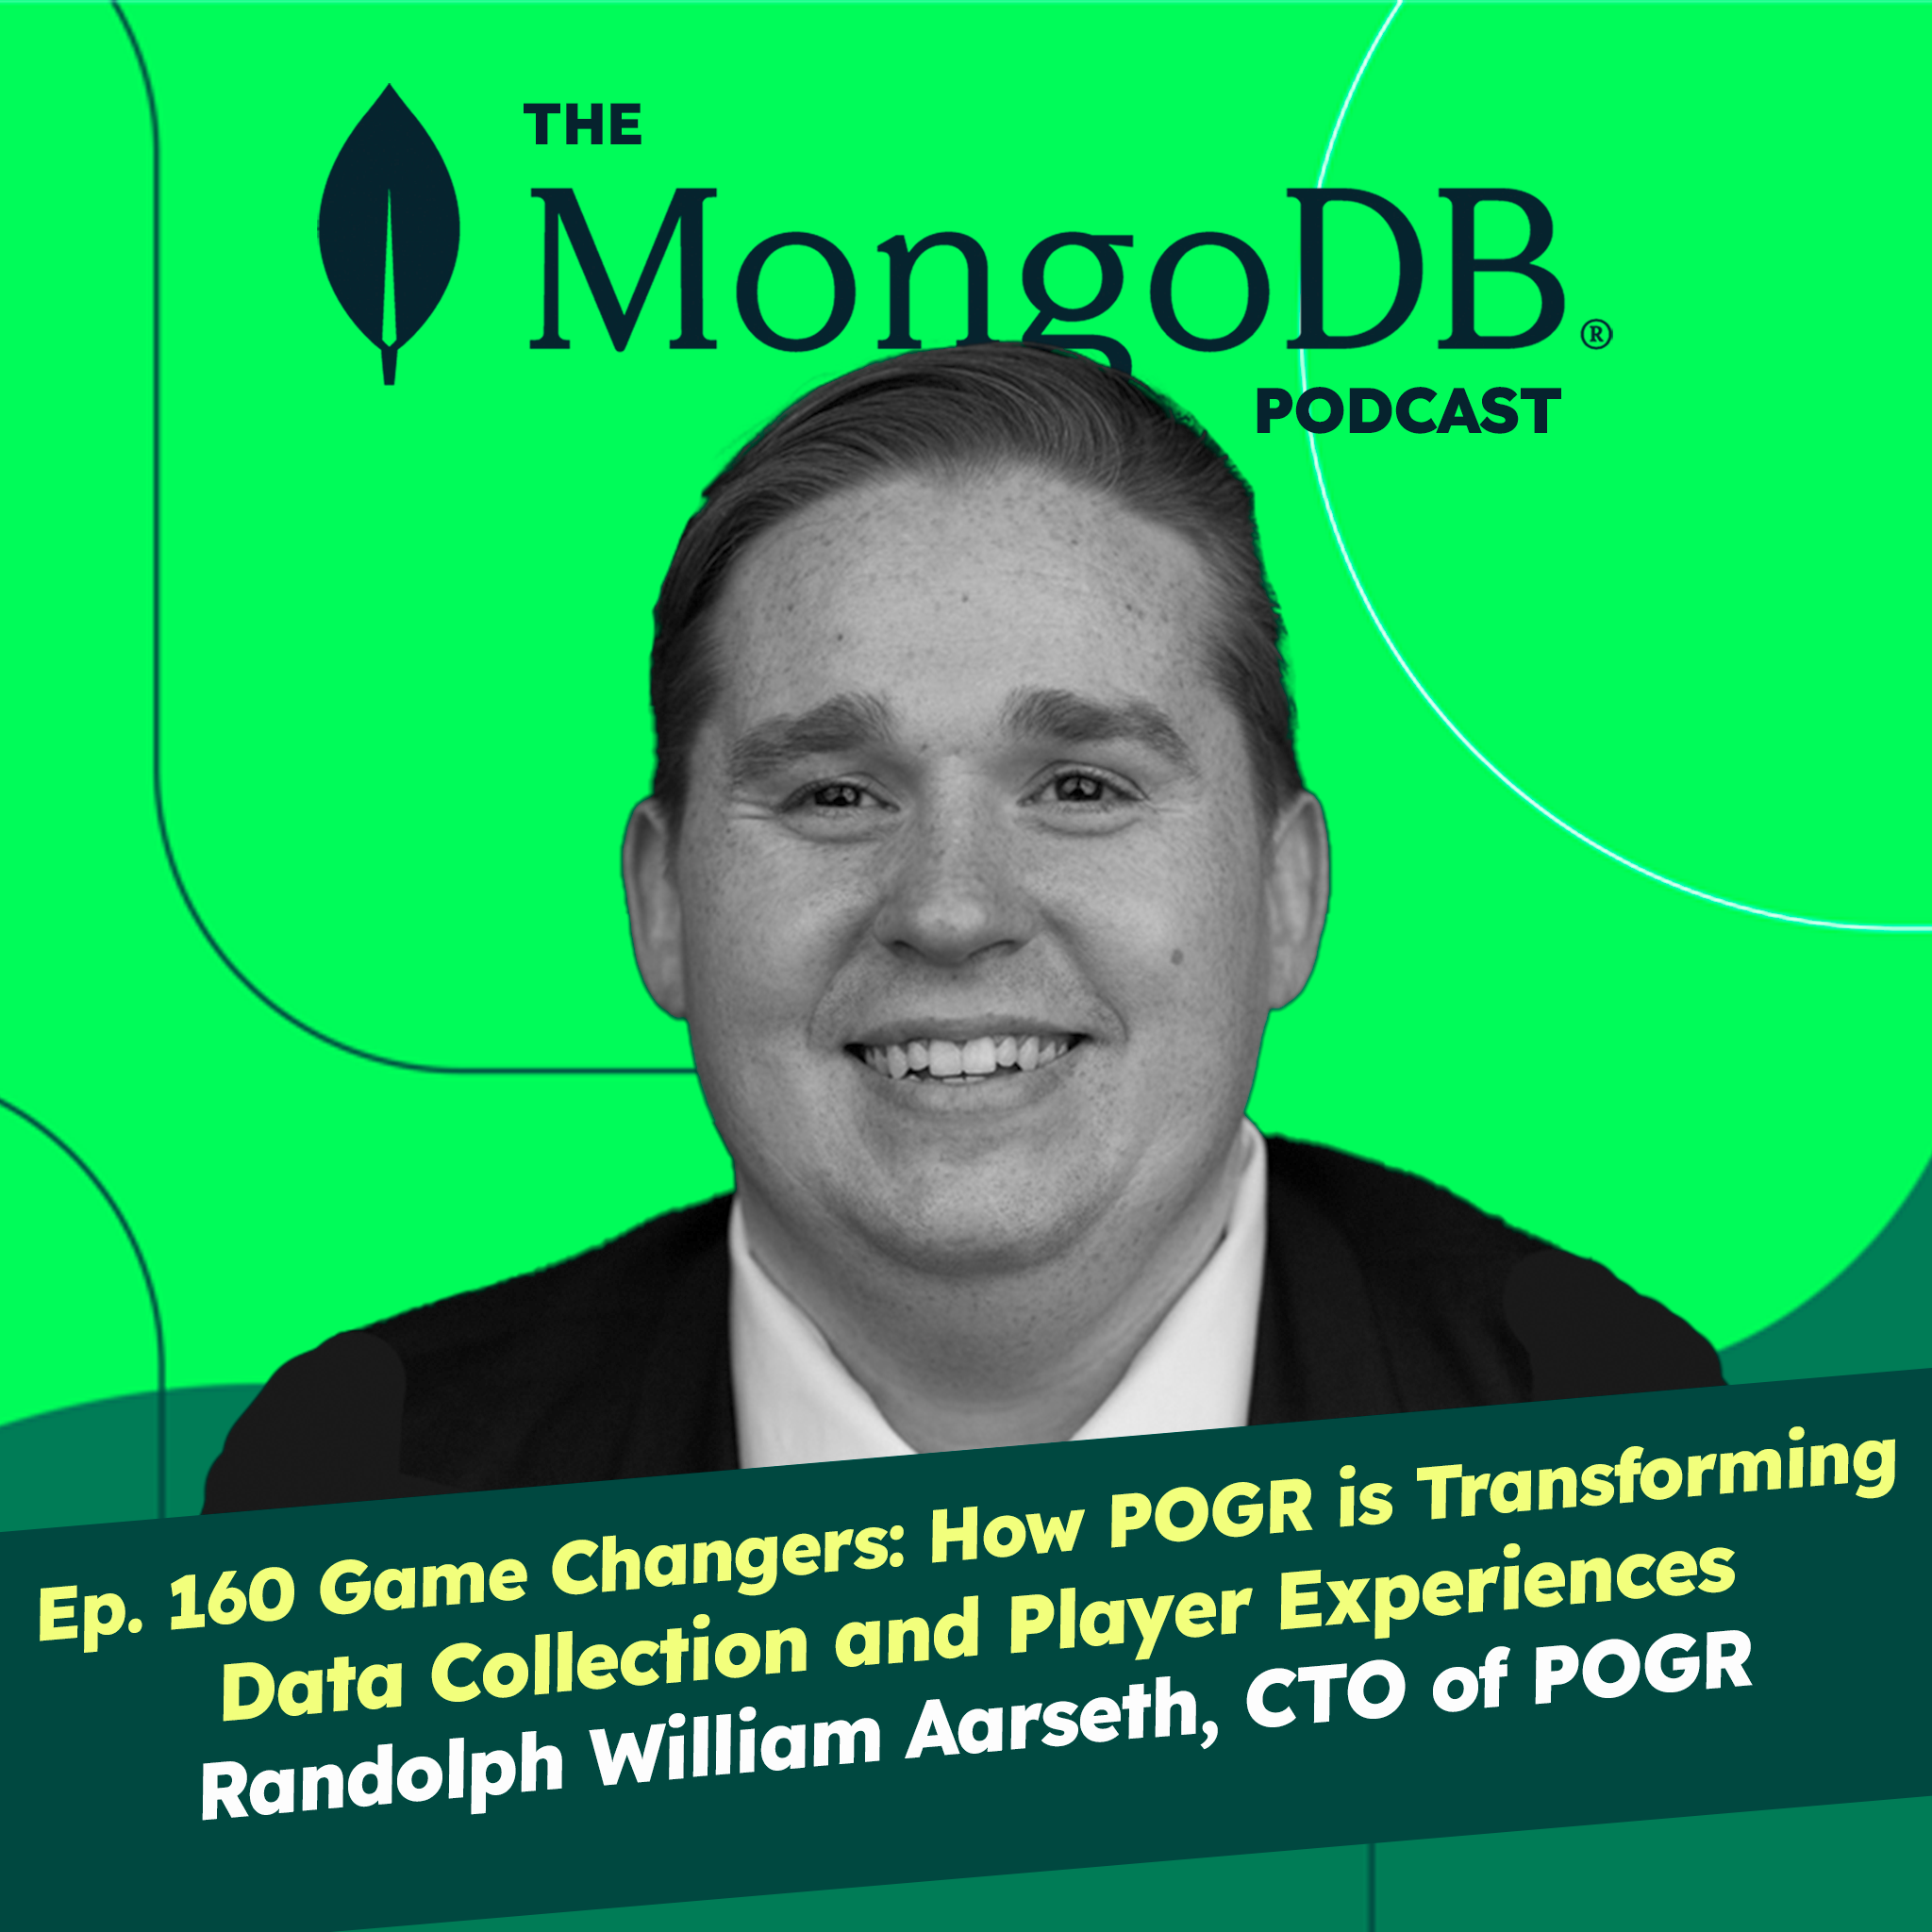 Ep. 160 Game Changers: How POGR is Transforming Data Collection and Player Experiences